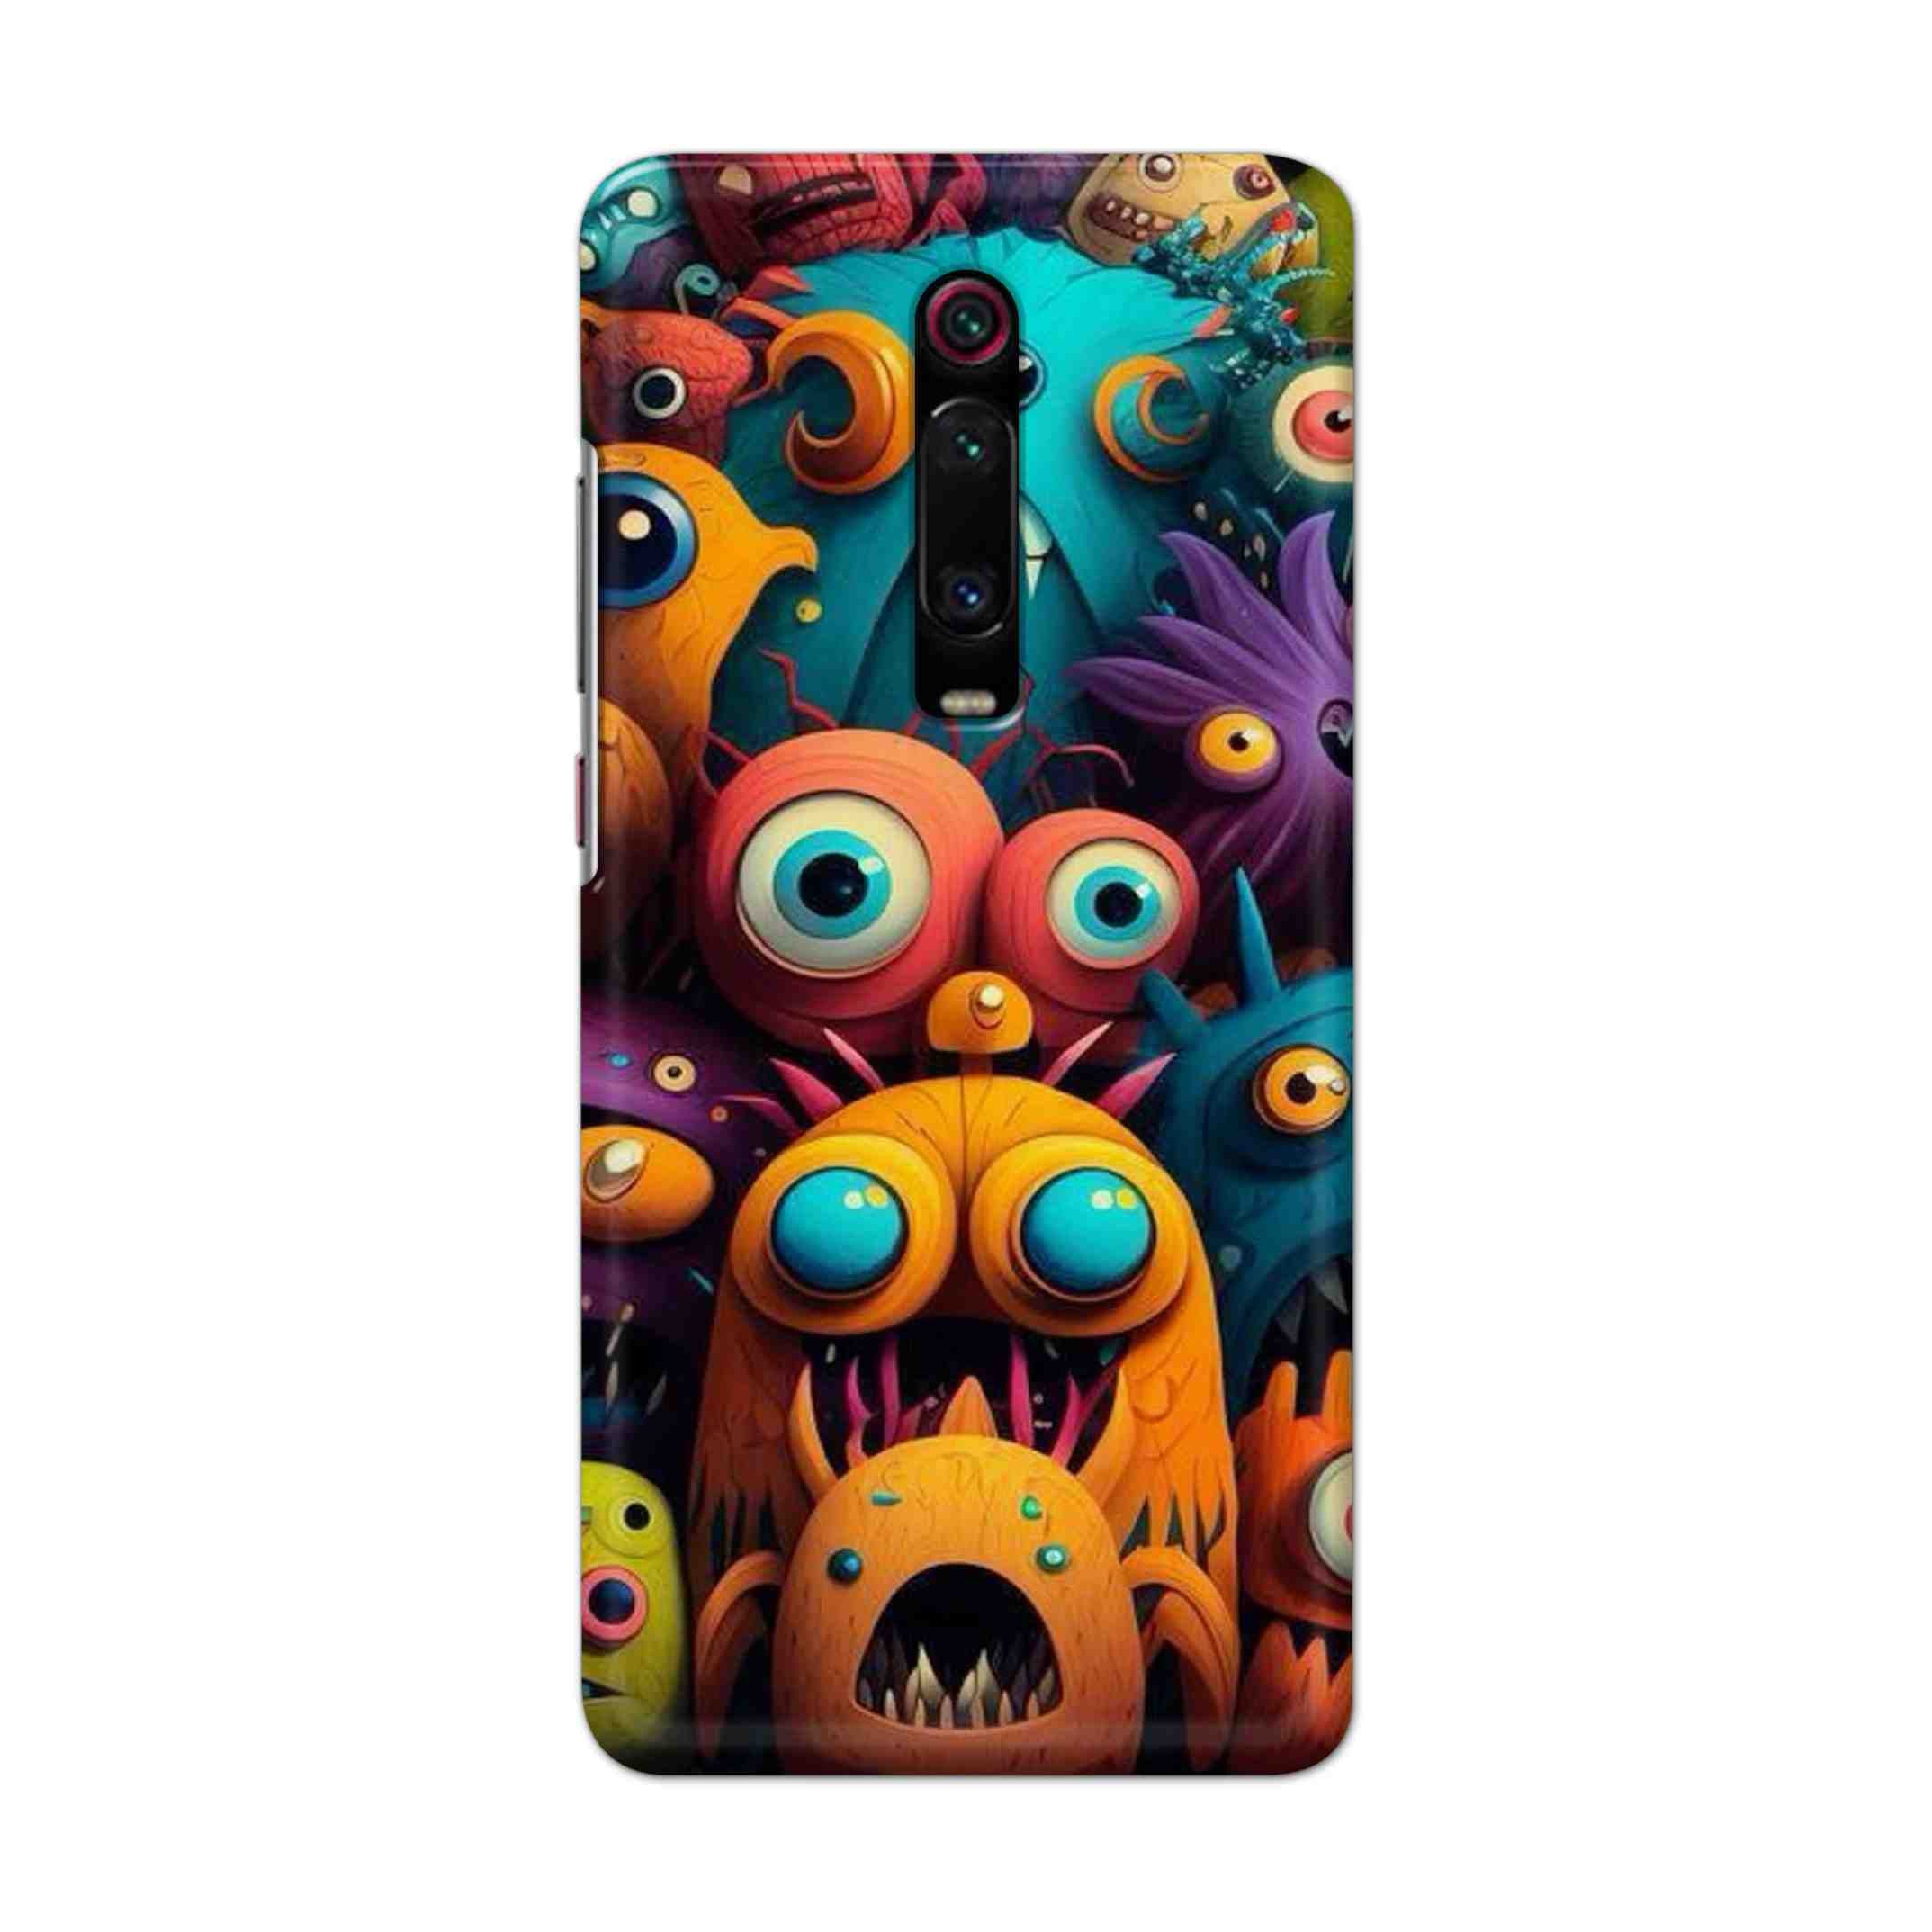 Buy Zombie Hard Back Mobile Phone Case Cover For Xiaomi Redmi K20 Online